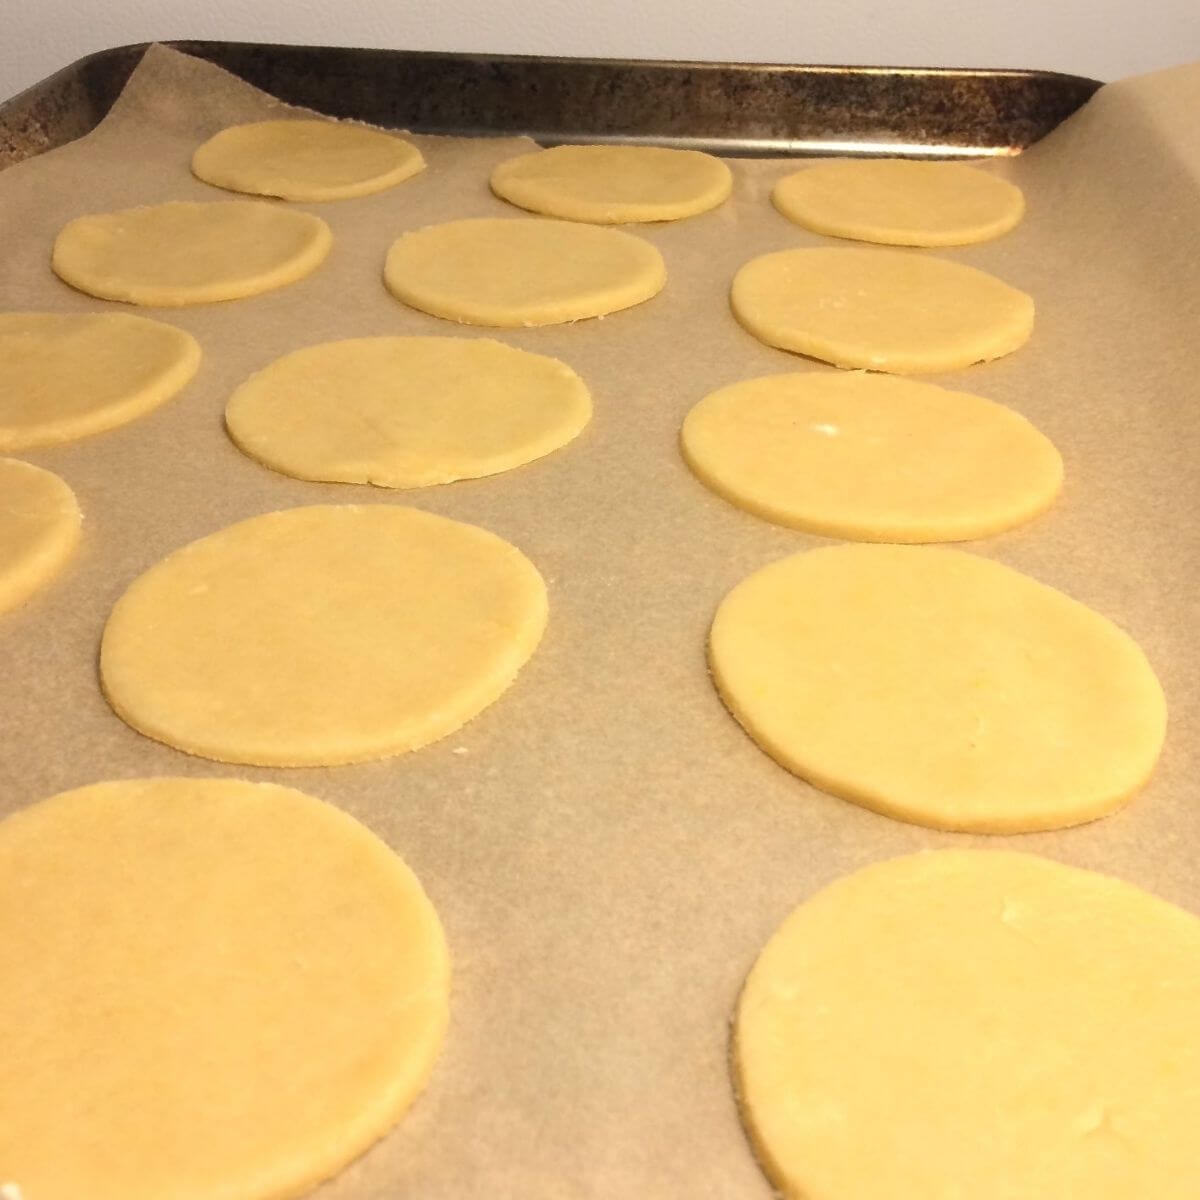 3 rows of 5 round cookie cutouts on parchent paper and a cookie sheet close up view